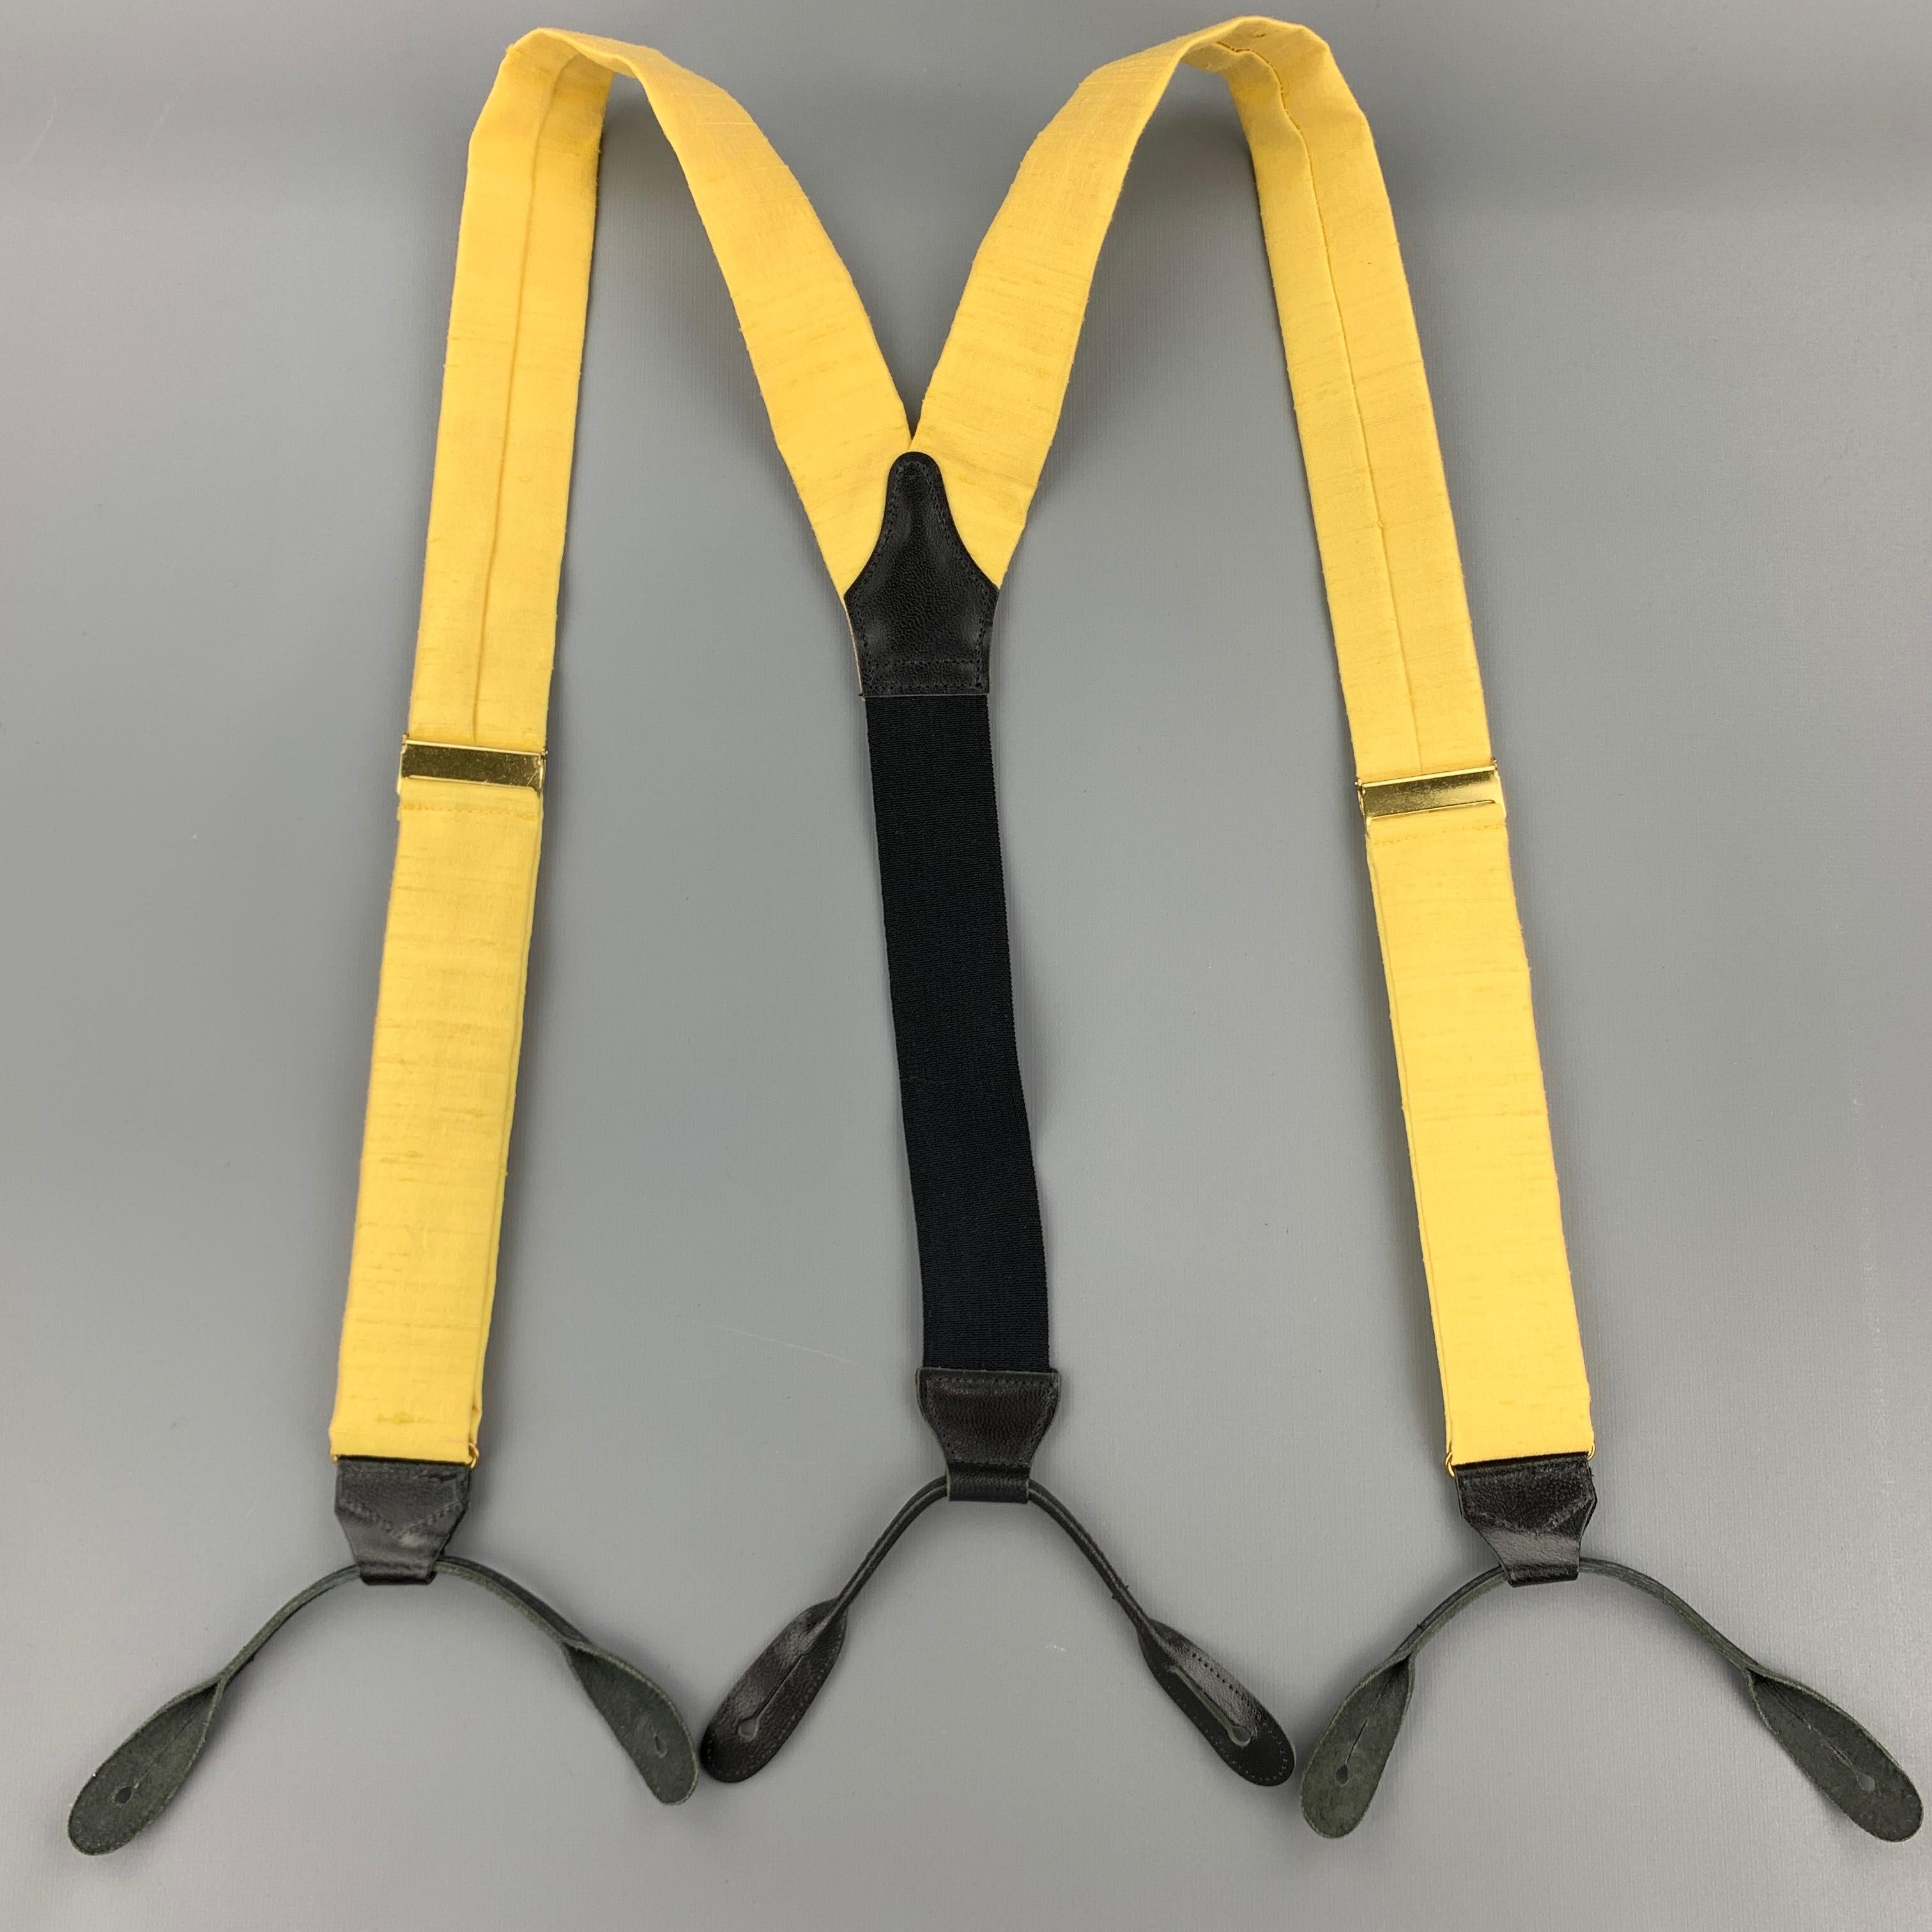 TURNBULL & ASSER suspenders comes in a yellow silk featuring a adjustable fit, leather trim, and includes trouser buttons. Made in England.

Excellent Pre-Owned Condition:

Measurements:

Width: 1.5 in.